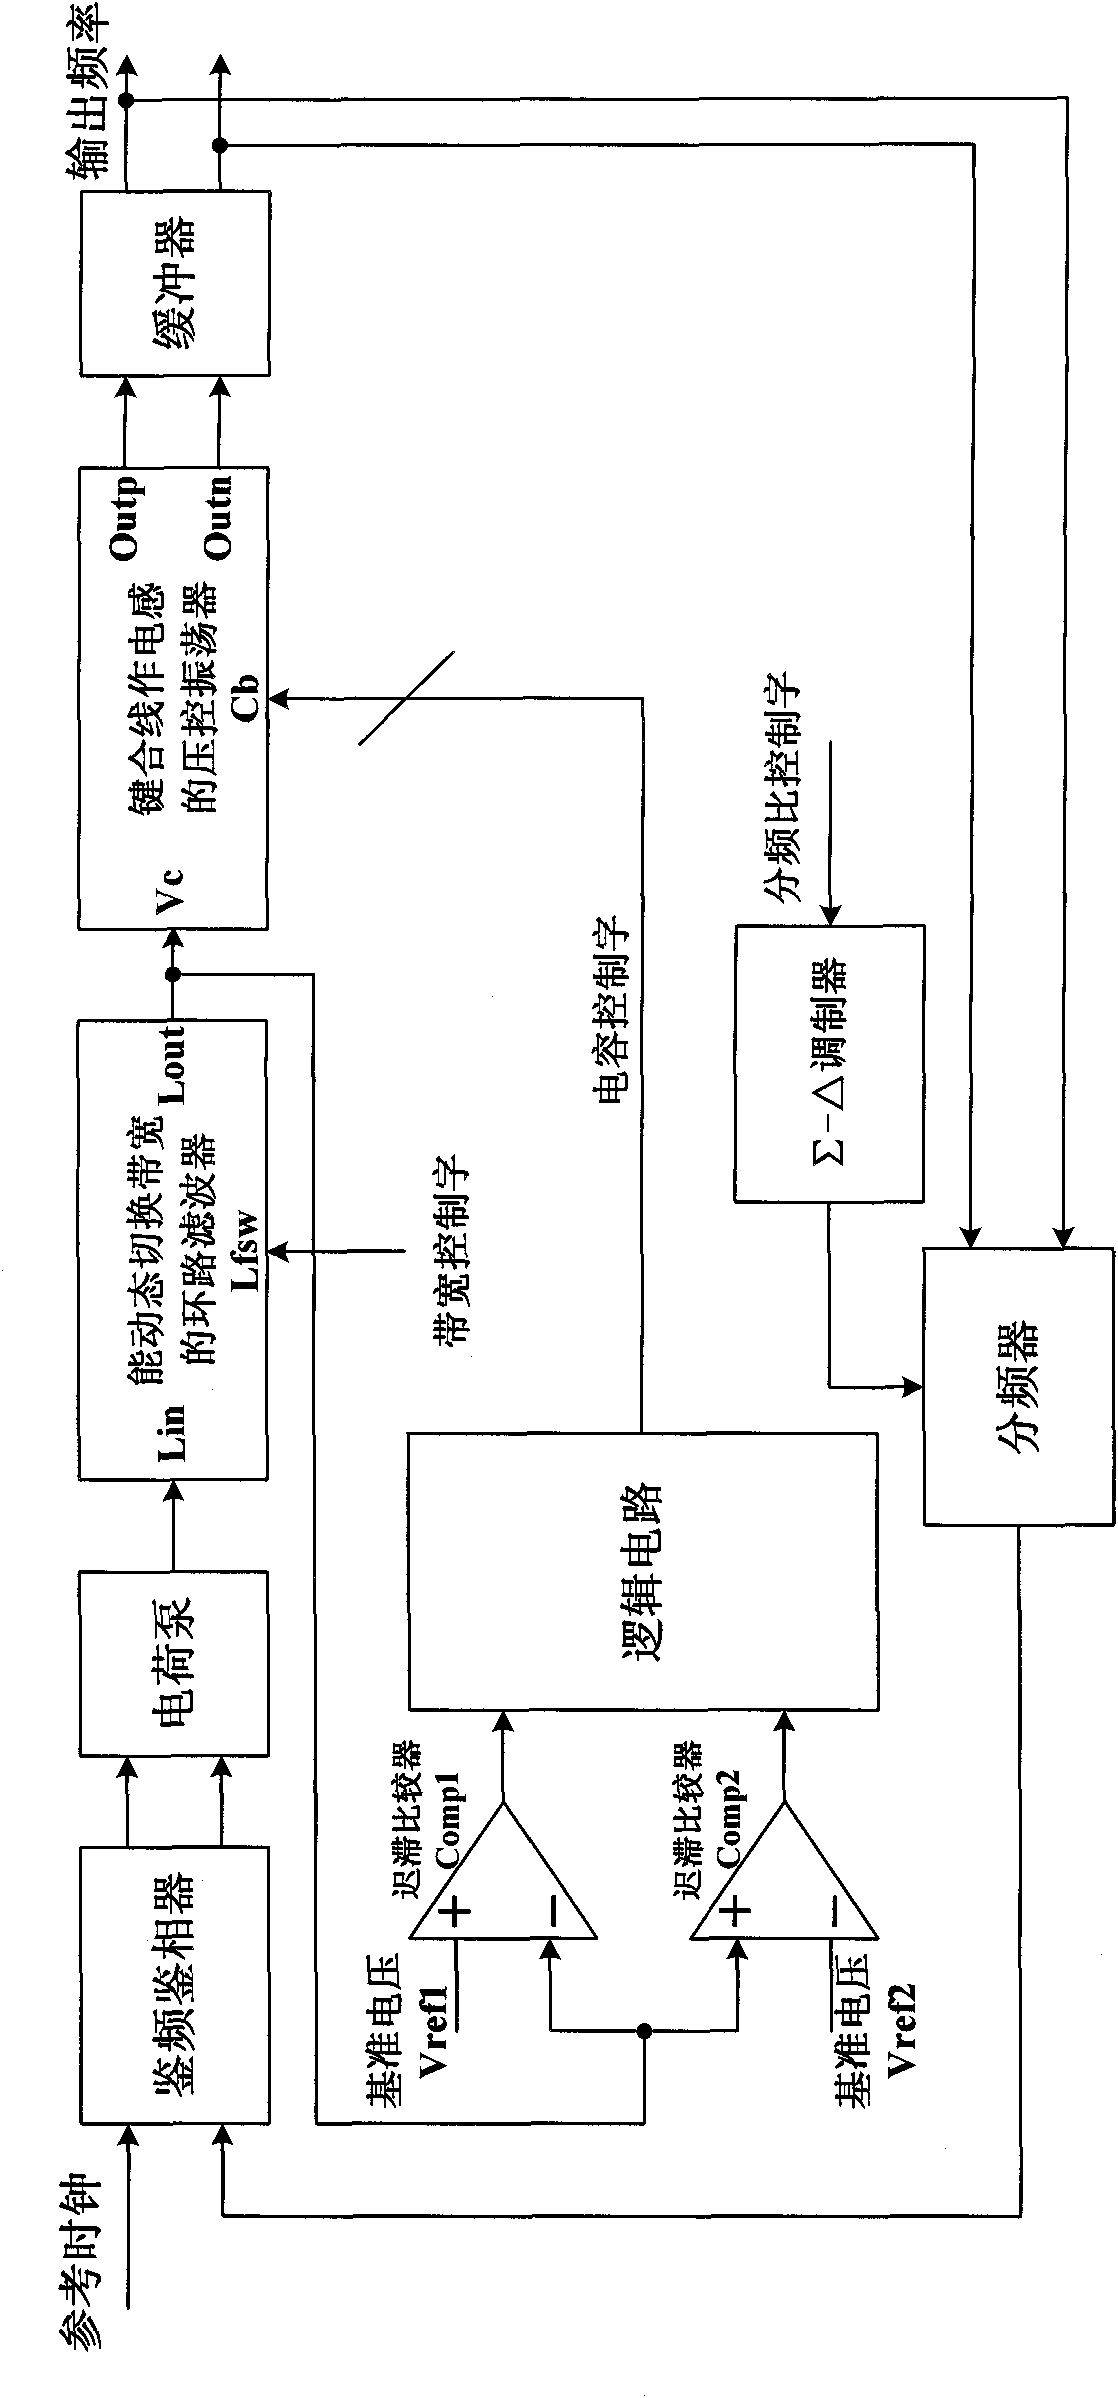 Frequency self-correction phase lock loop adopting bonding wire as electric inductance of oscillator